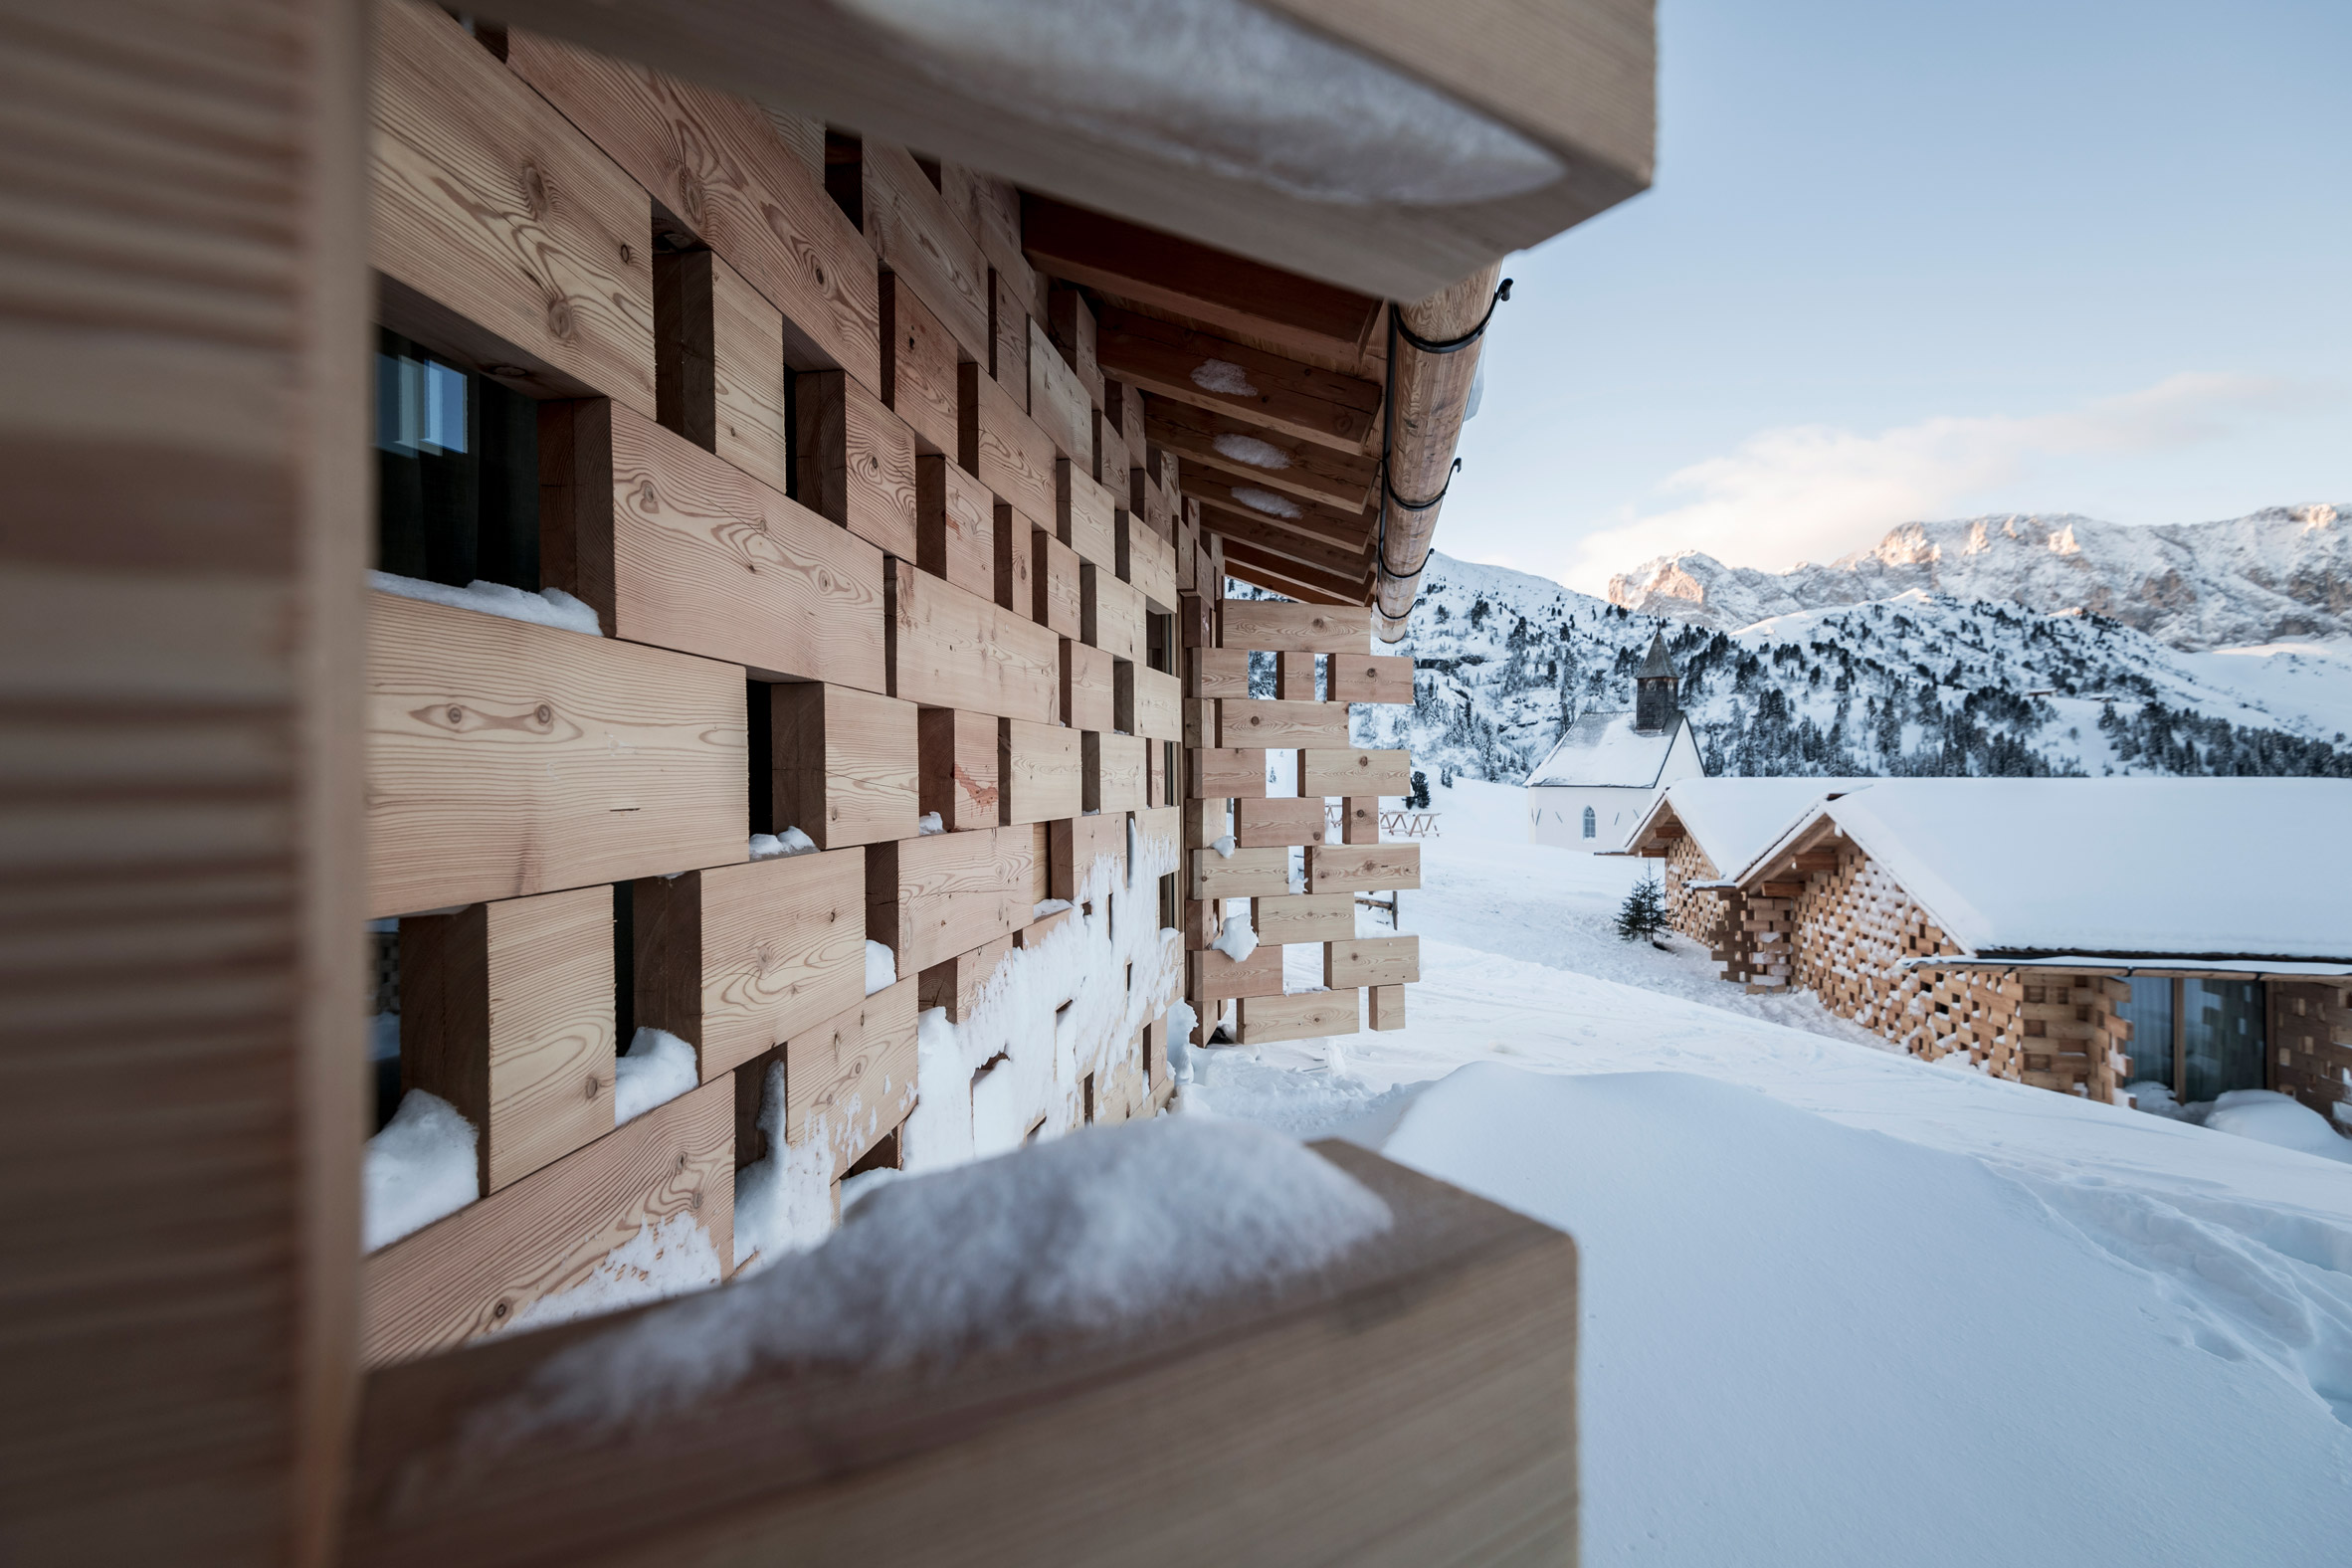 Zallinger Retreat by Network of Architecture (NOA) in Tyrol, Italy